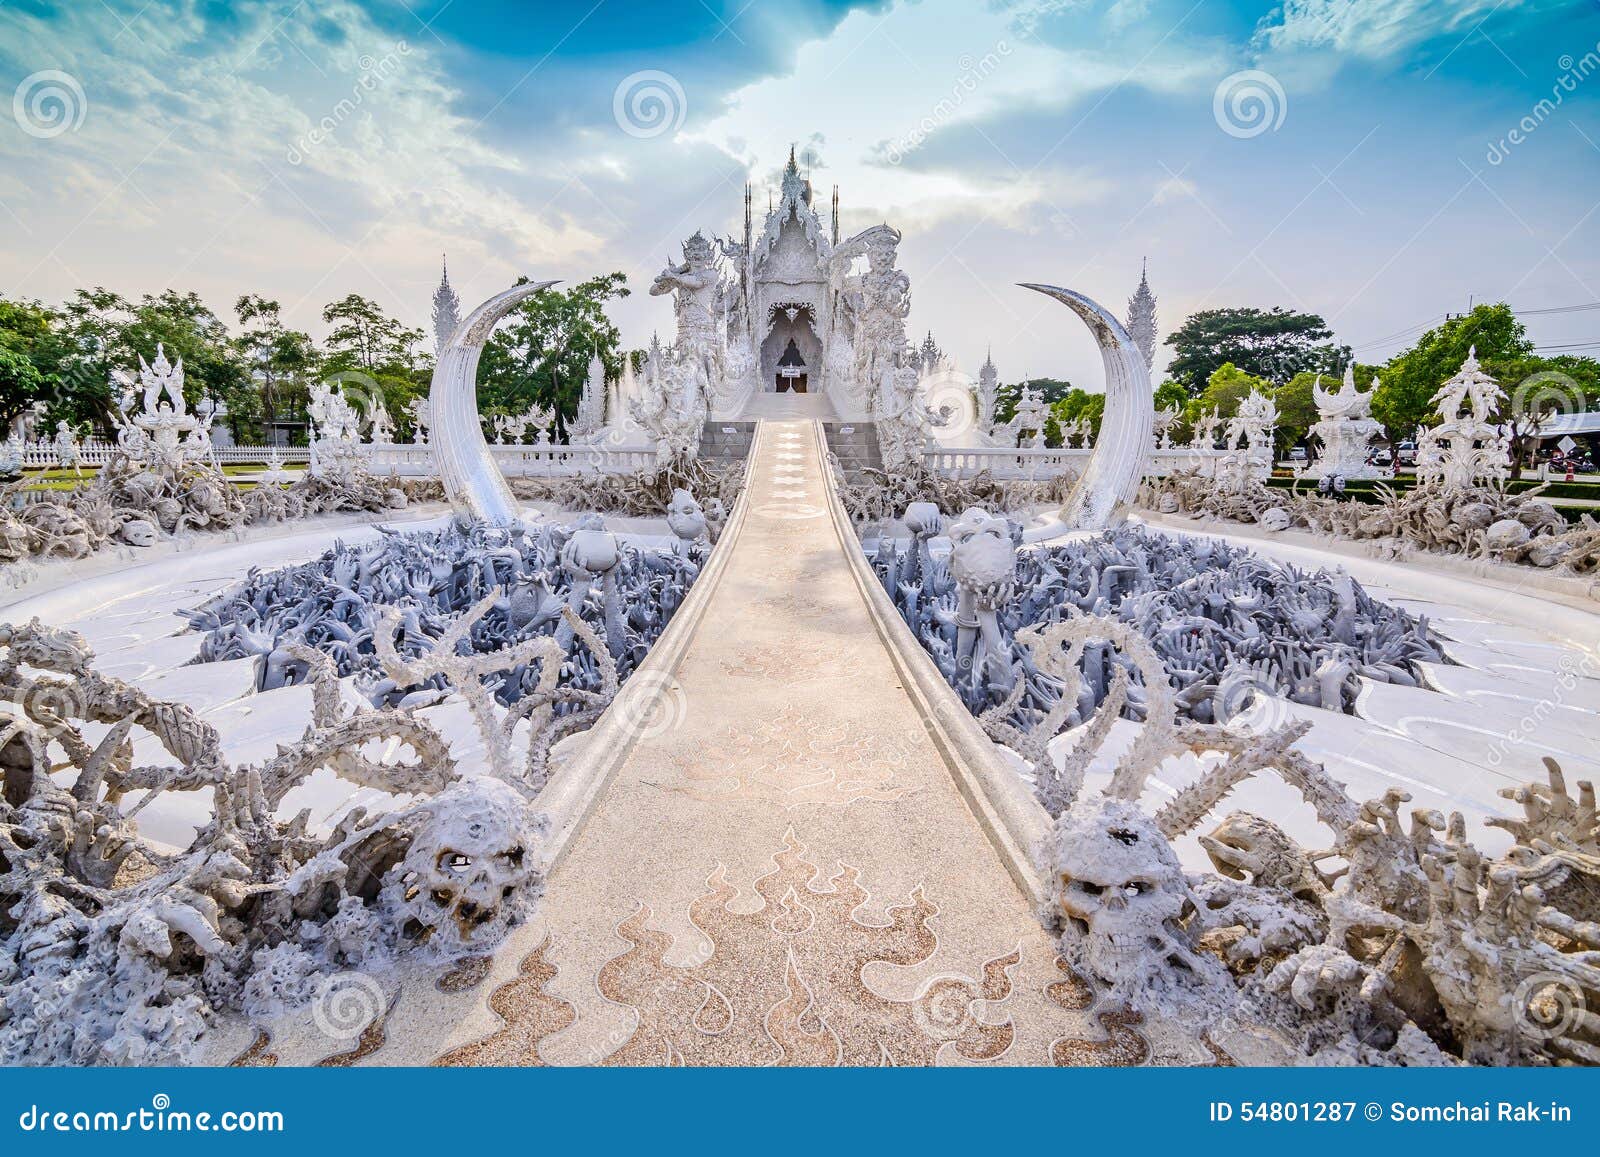 thailand temple or grand white church call wat rong khun,at chiang rai province, thailand,contemporary unconventional buddhist te